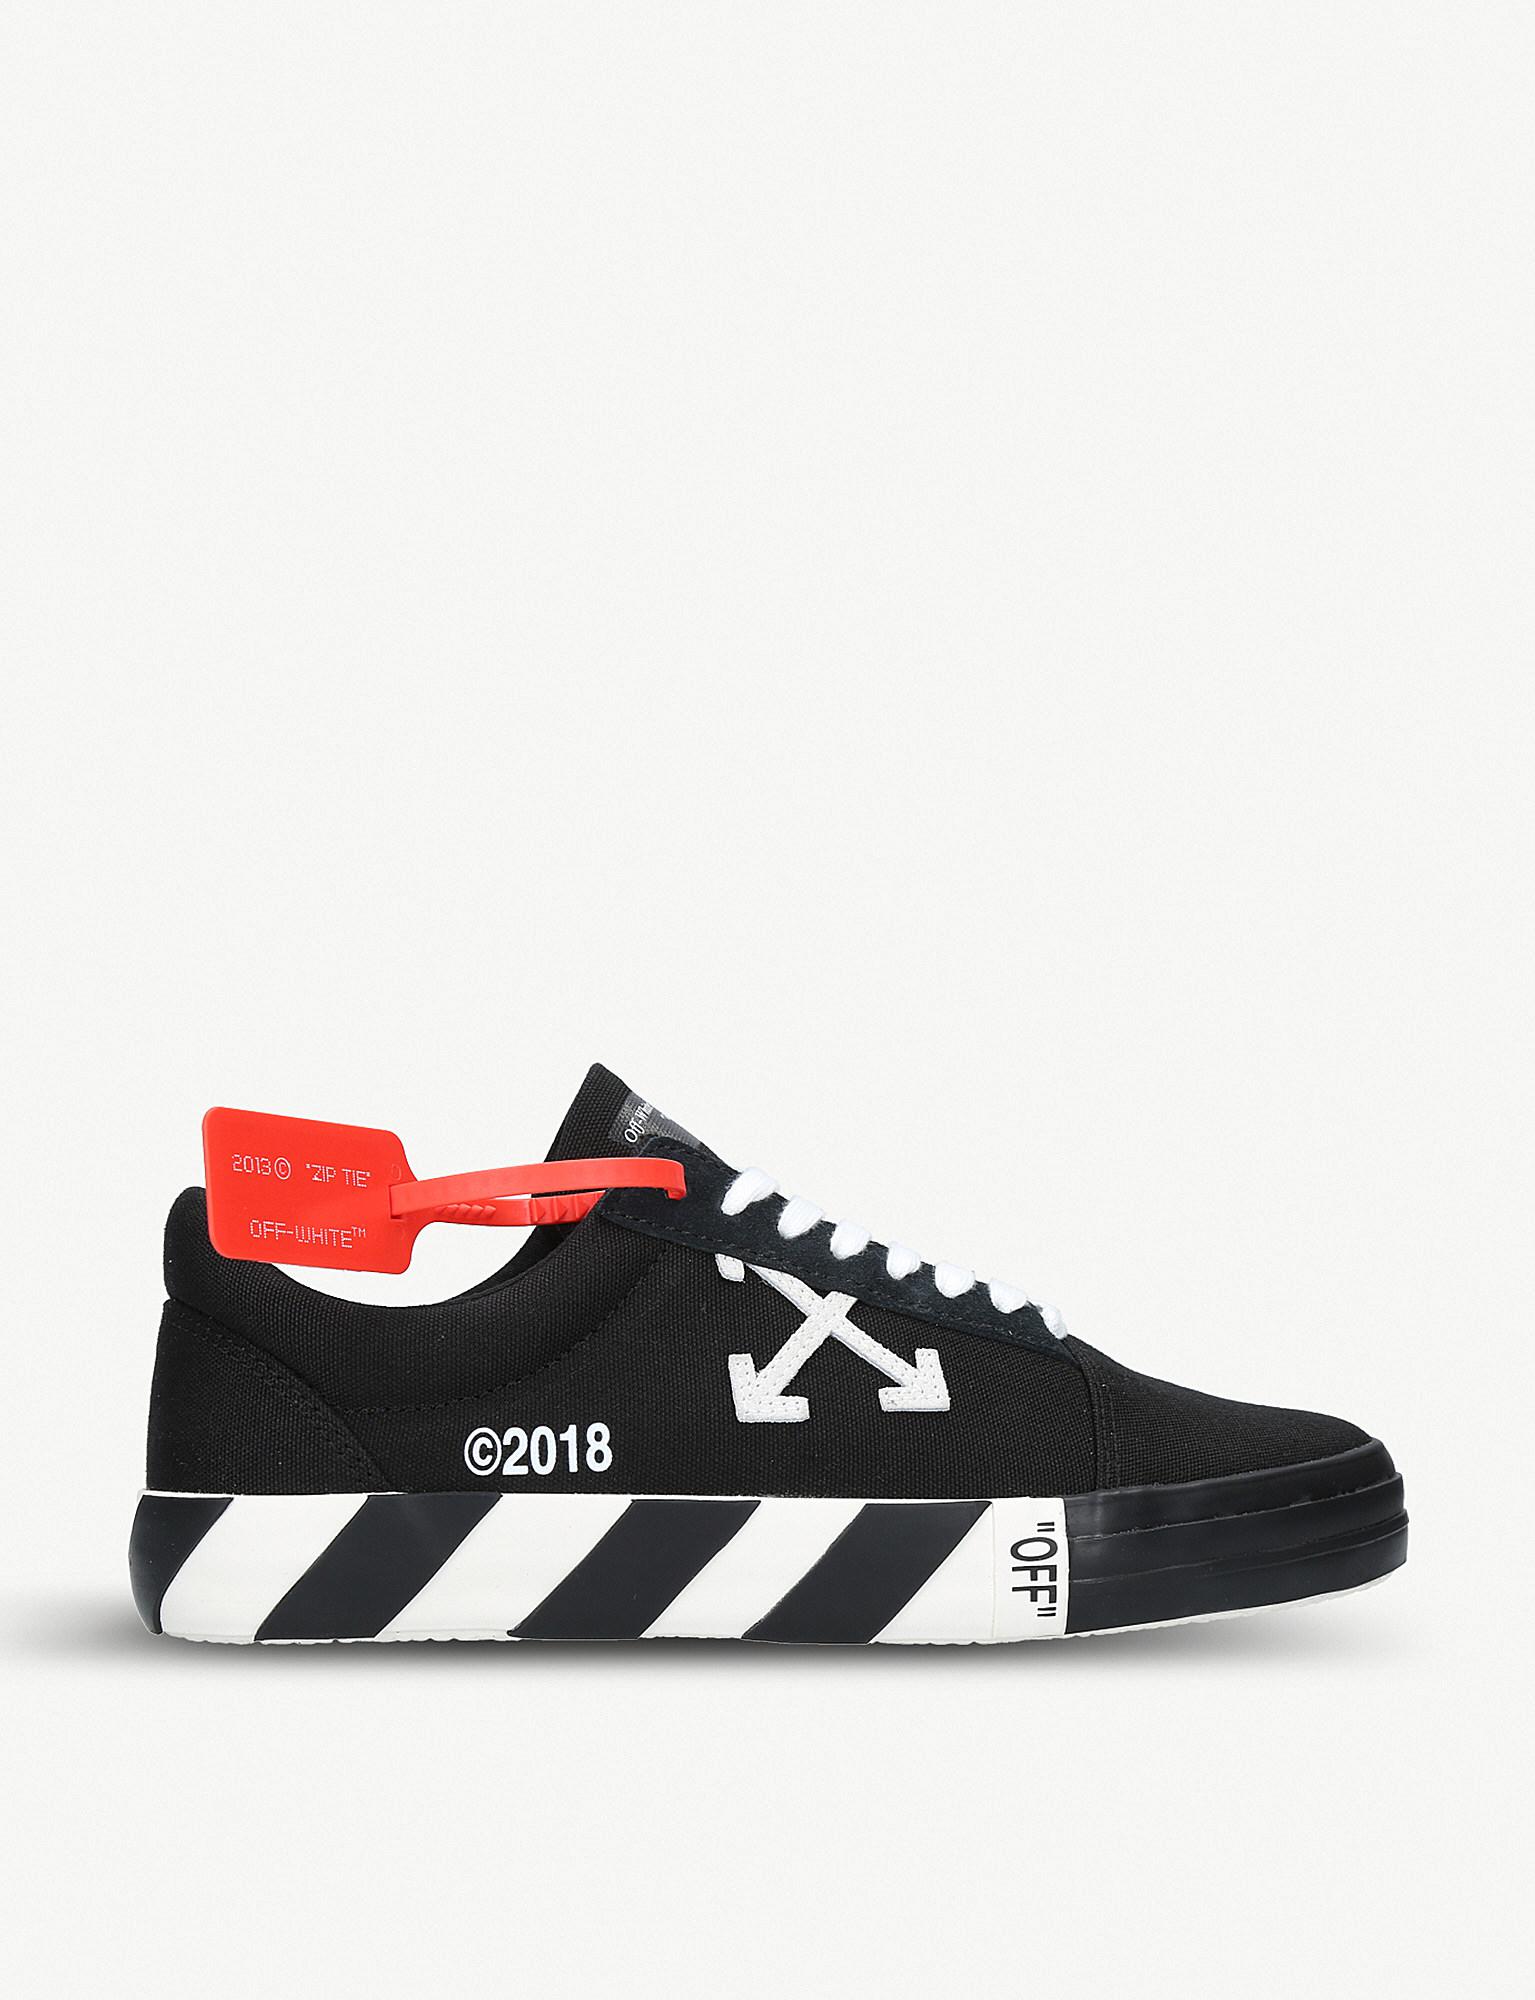 Off-White c/o Virgil Abloh Vulc Canvas Trainers in Black for Men - Lyst